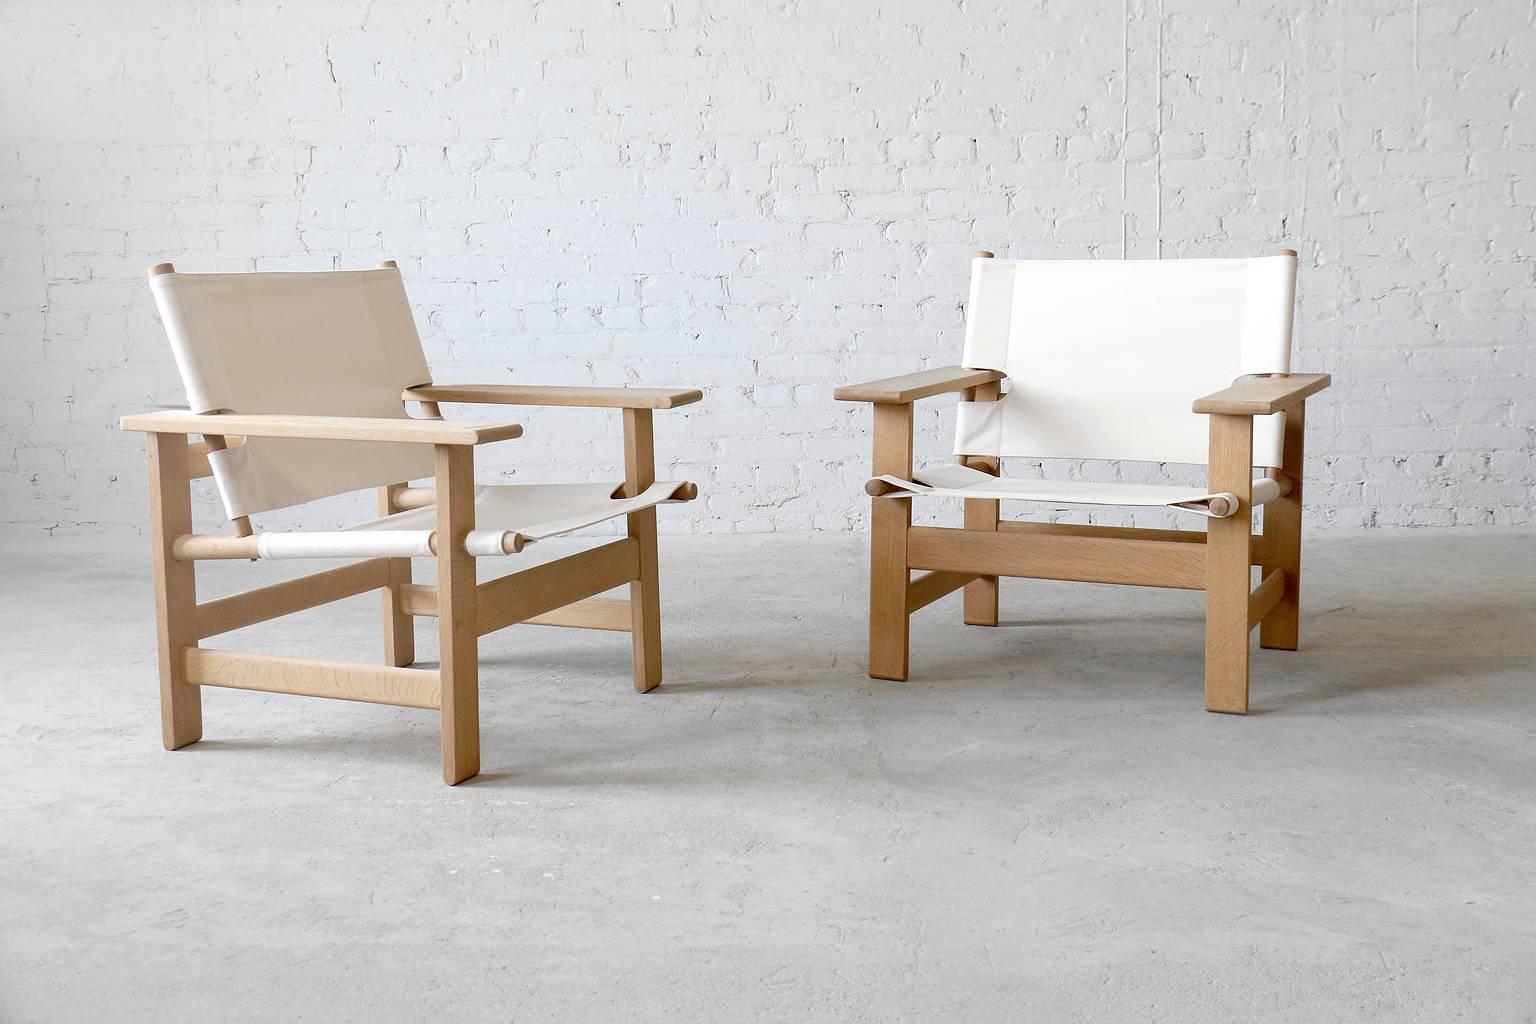 Model #2231.
Designed in 1958.
Solid oakwood frame.
Brand new canvas seat and backrest.
Rarely seen model.

A pair of oak and canvas easy chairs by Børge Mogensen for Fredericia. Loosely based on the design of Mogensen's iconic Spanish chair,